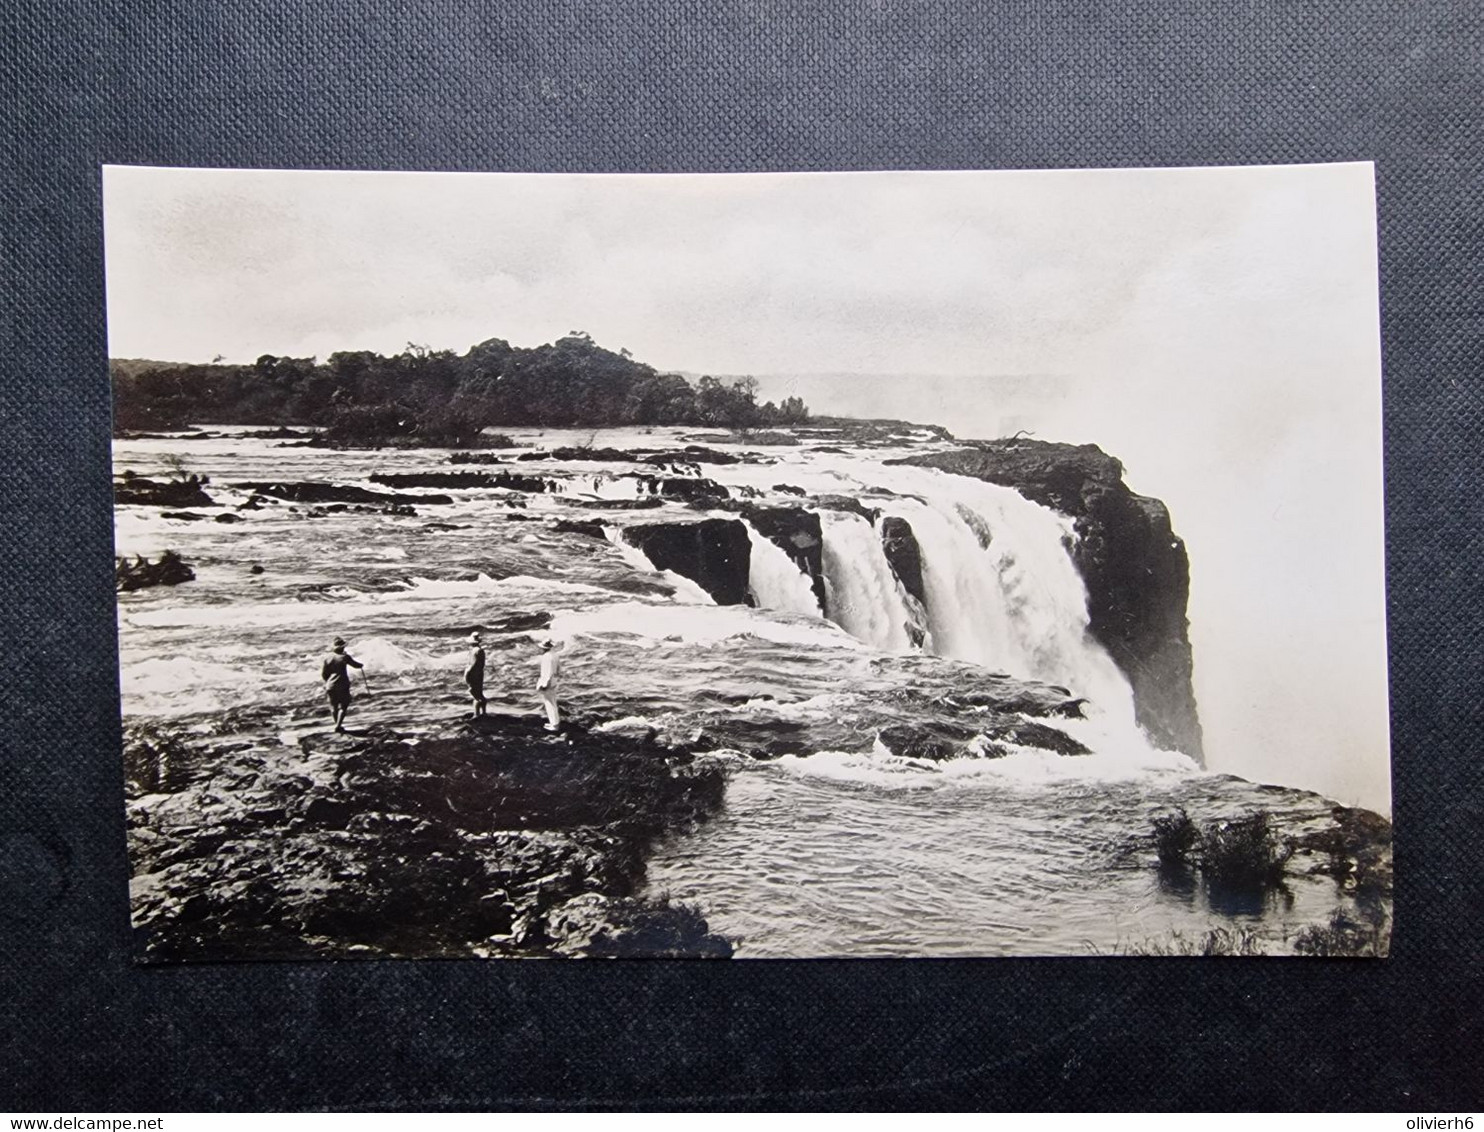 CARNET 12 CP RHODESIA (M2301) 12 Views of the VICTORIA FALLS (14 vues) The greatest river wonder in the world